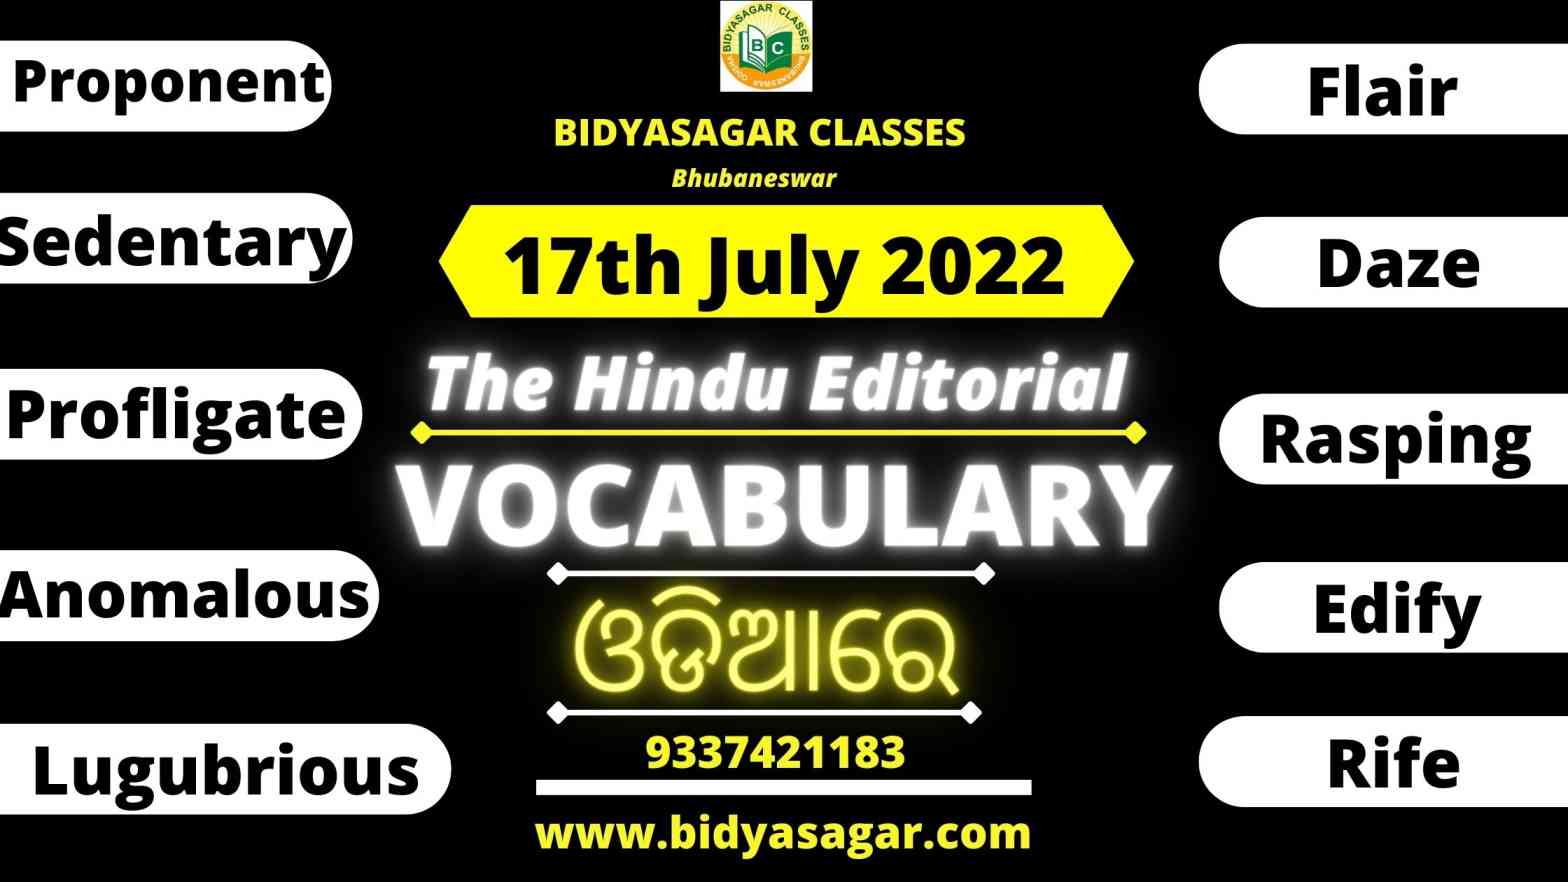 The Hindu Editorial Vocabulary of 17th July 2022